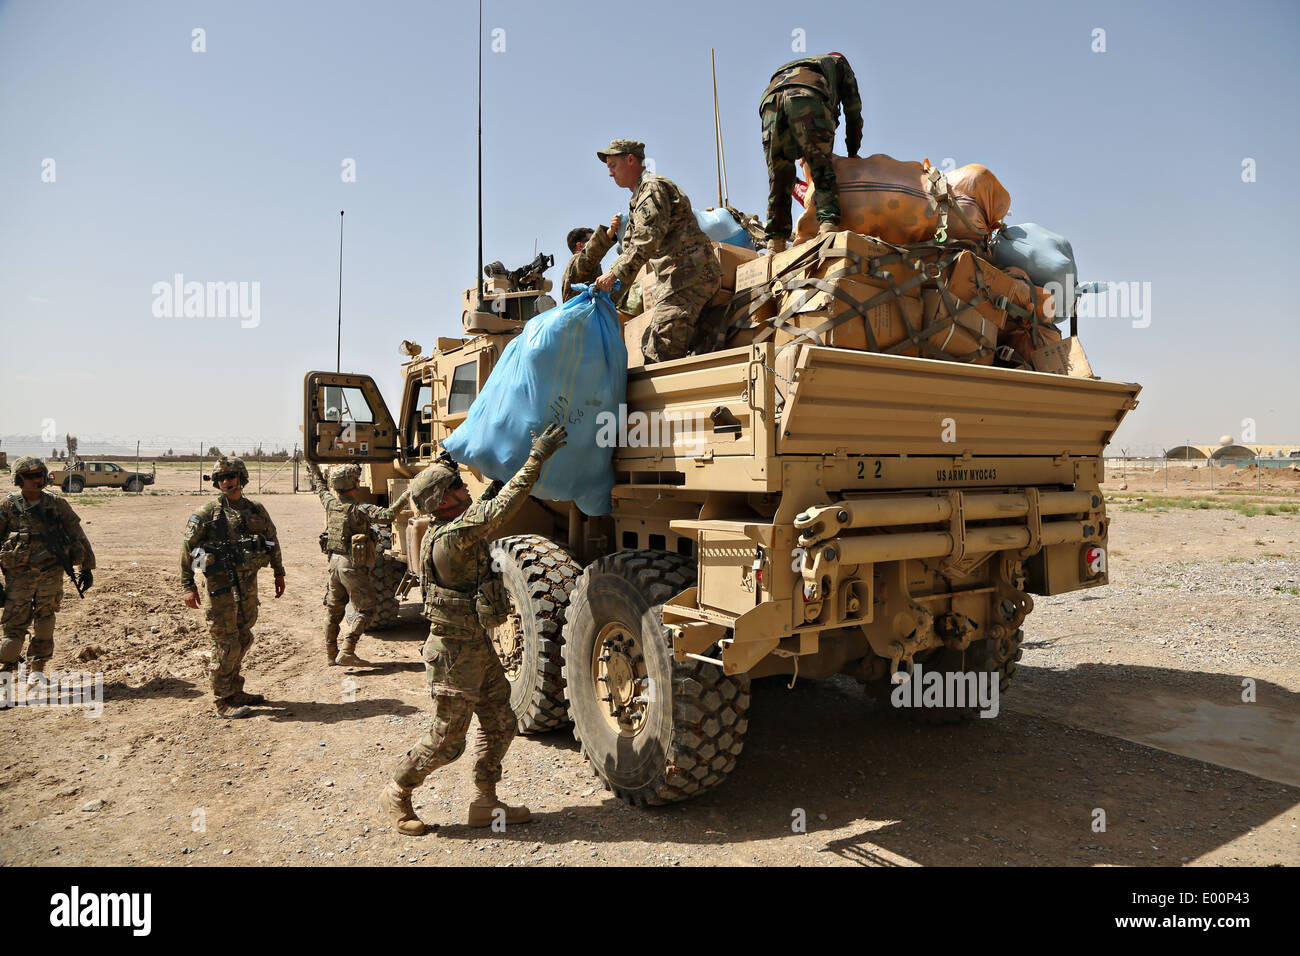 US soldiers assigned and Afghan National Army soldiers unload humanitarian aid supplies at a school April 16, 2014 in Kandahar, Kandahar province, Afghanistan. Stock Photo